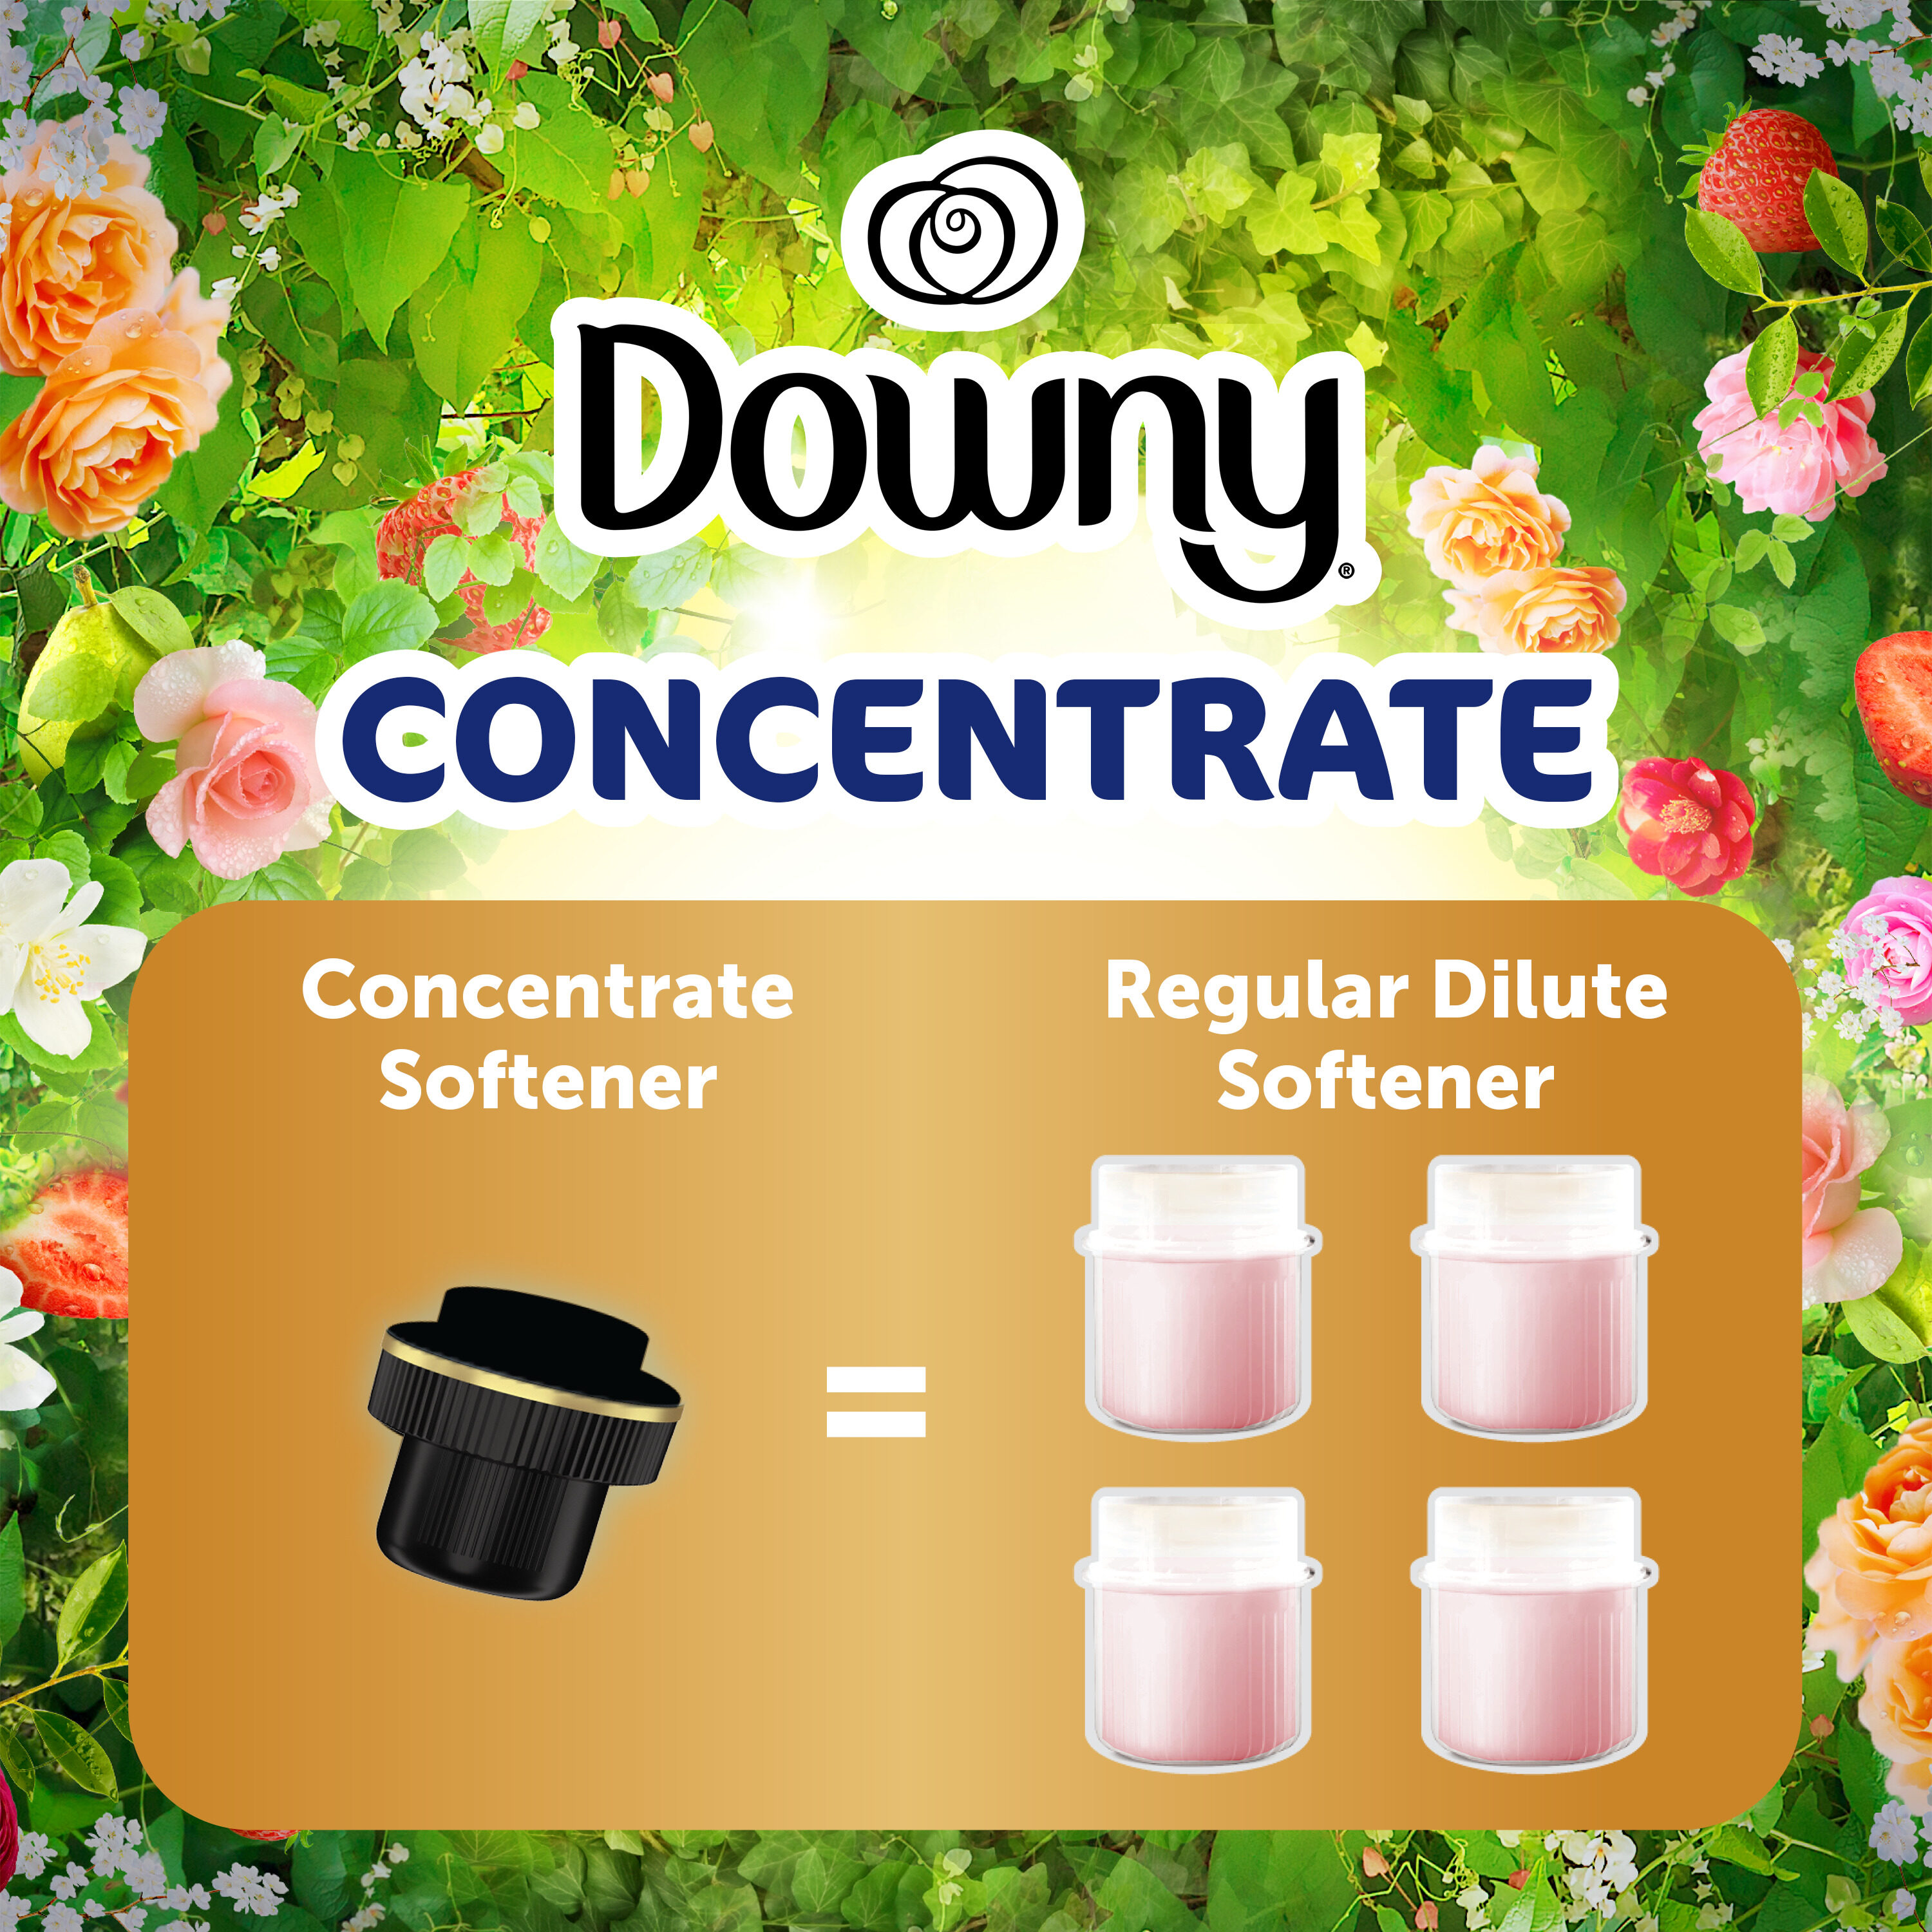 DOWNY BOTTLE 370ML PASSION